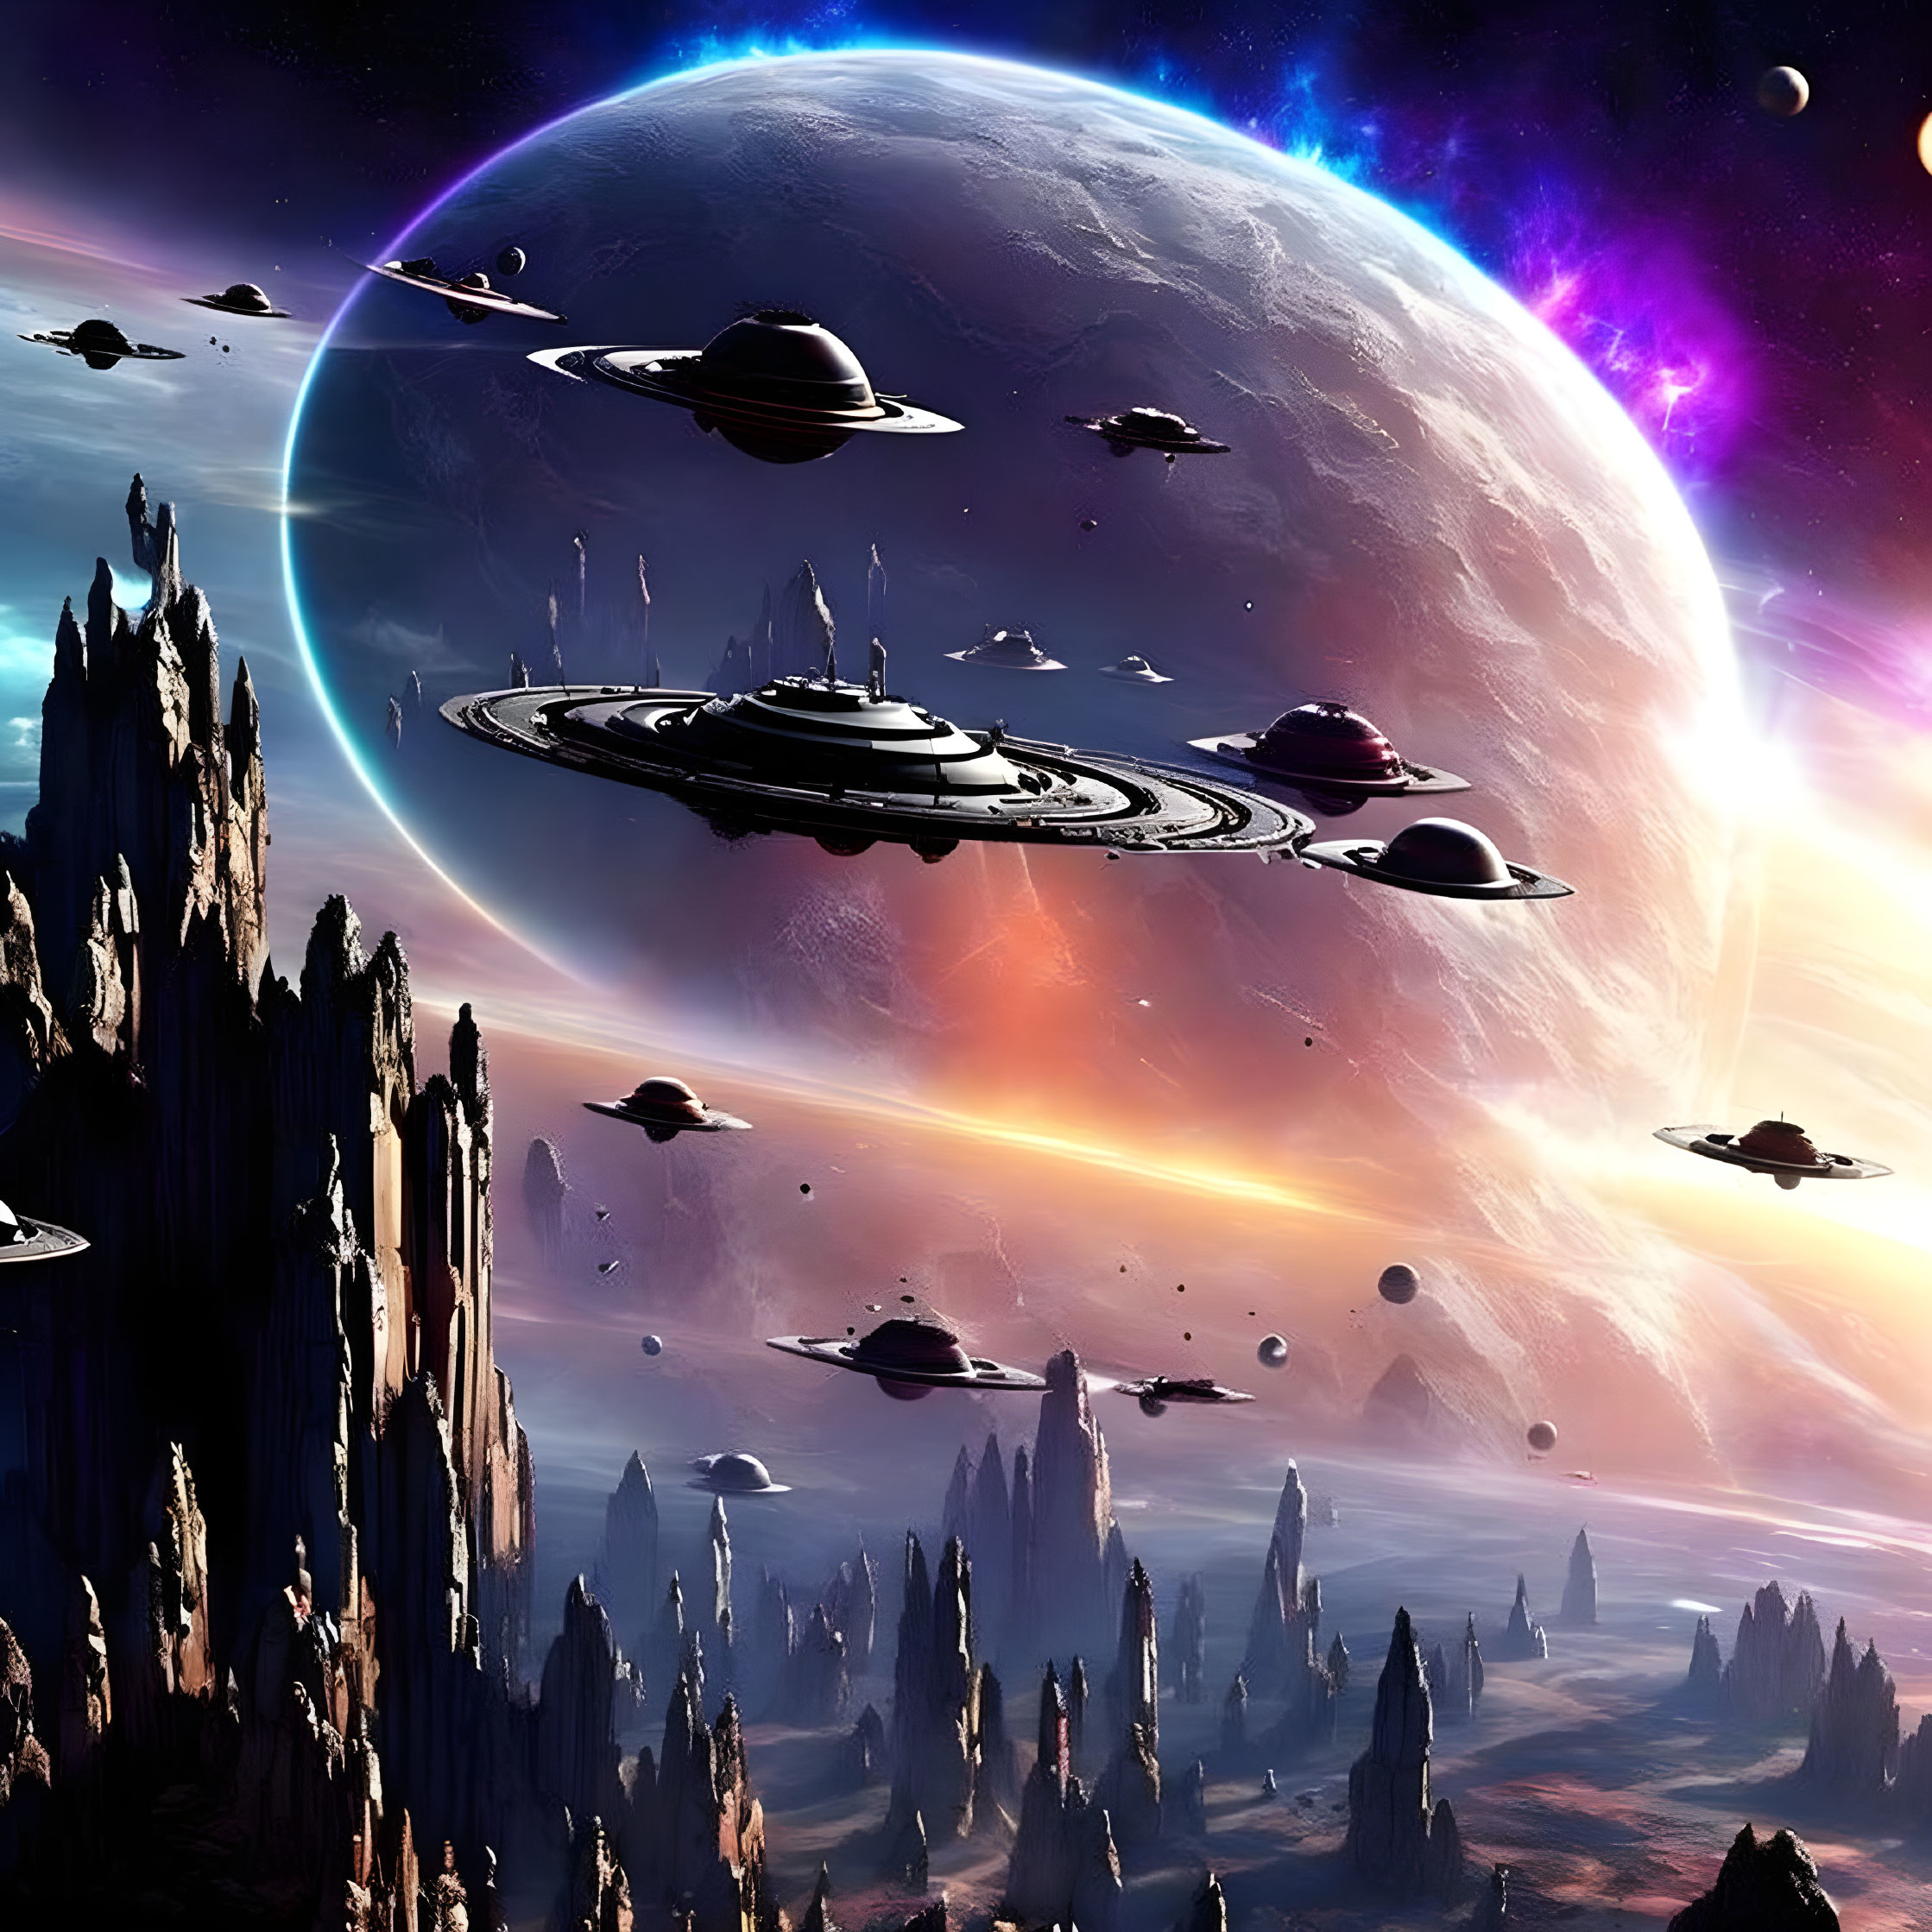 Sci-fi scene: Spaceships orbiting planet with moons in starry sky